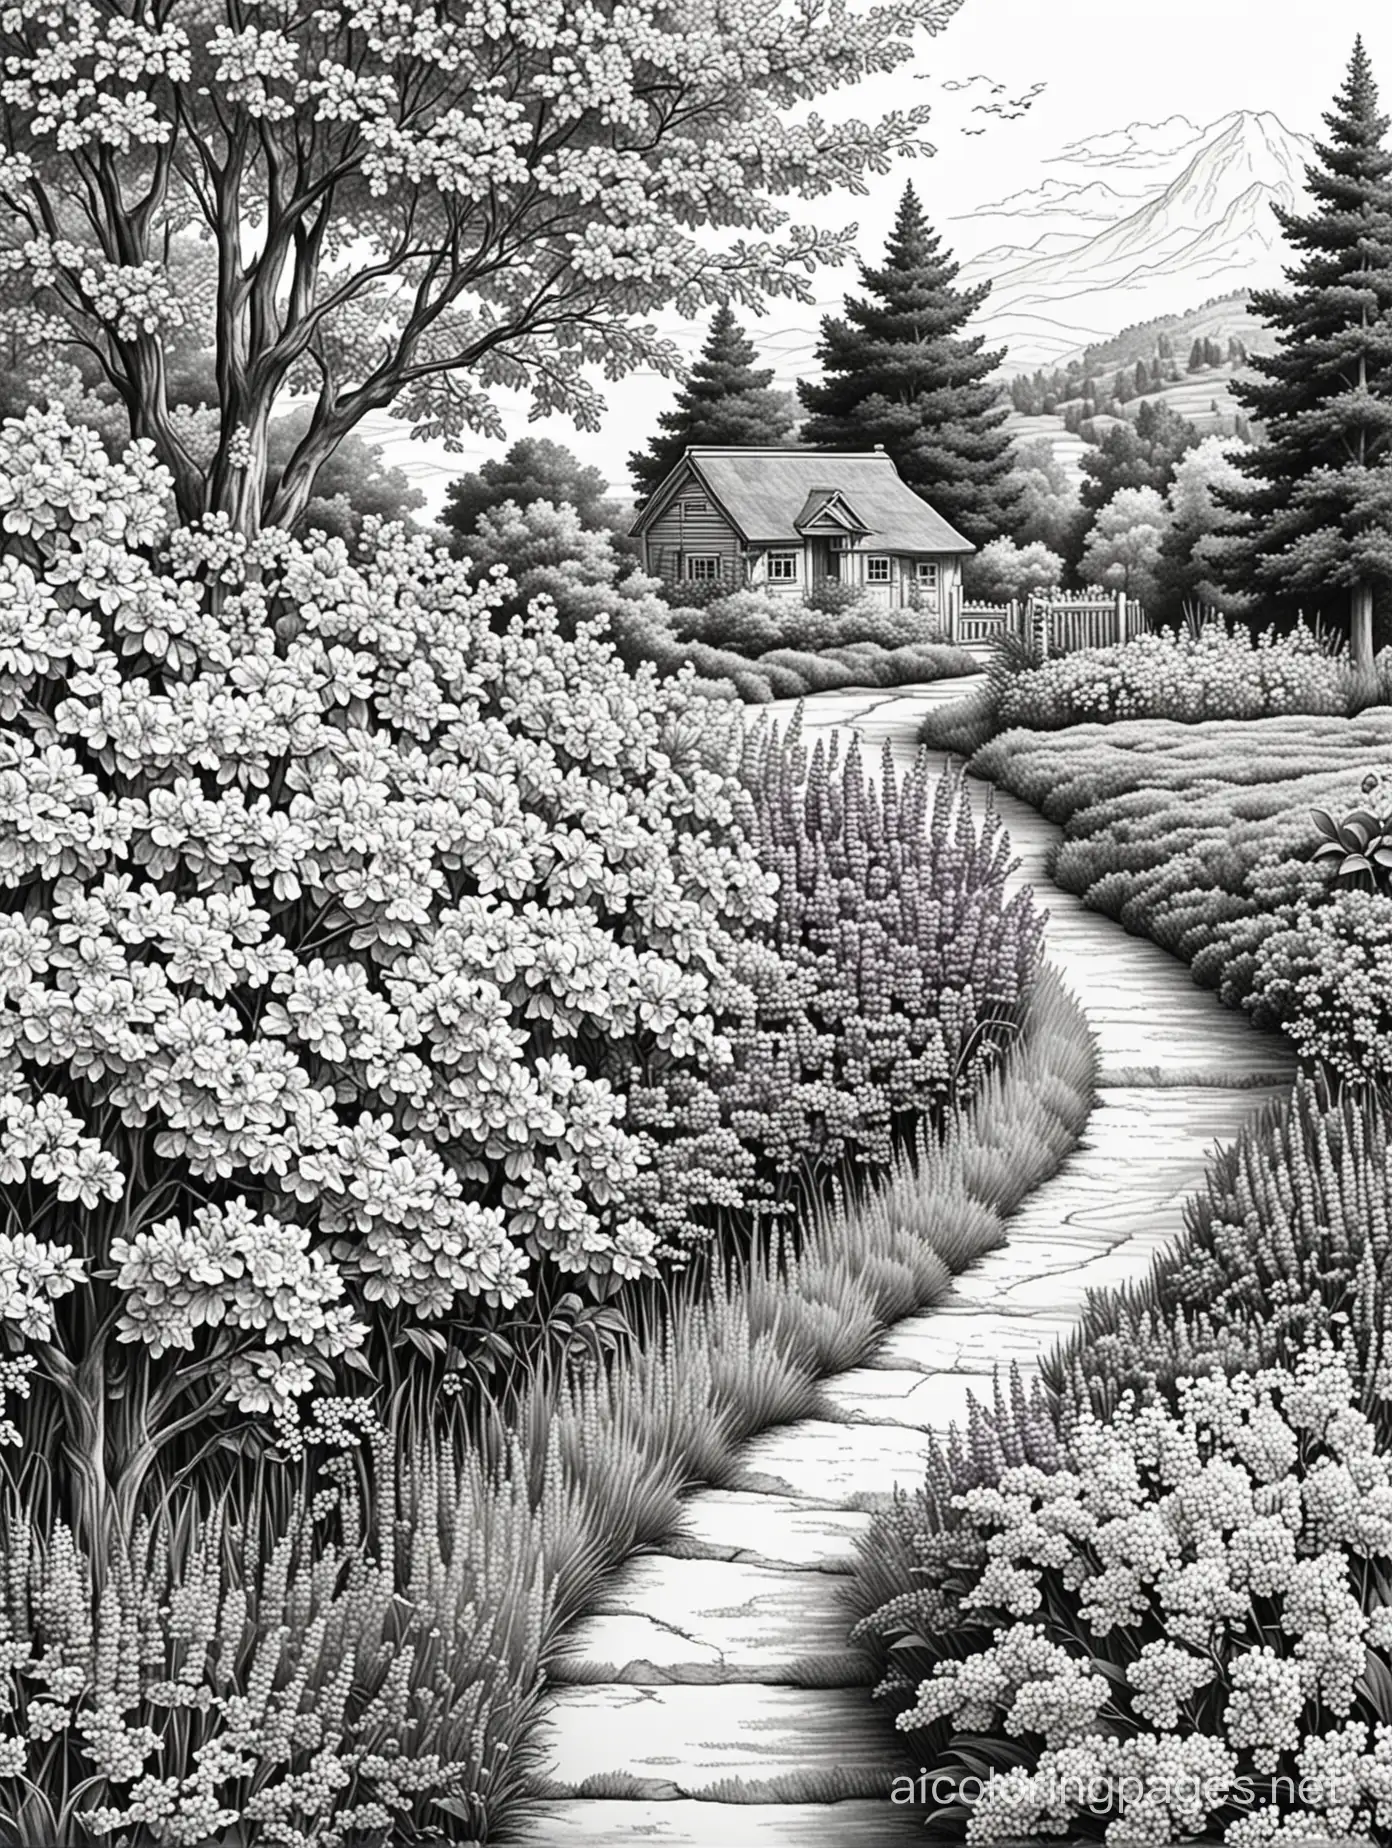 Create a picture for adult colouring in black and white only.  The theme of the picture: British garden. gardening. Style: sketching, ink, line drawings. Luxurious lilacs in bloom
There are also evergreen trees in the picture The detail of the picture is low. there are light hills in the background Ratio 11:8.5 , Coloring Page, black and white, line art, white background, Simplicity, Ample White Space. The background of the coloring page is plain white to make it easy for young children to color within the lines. The outlines of all the subjects are easy to distinguish, making it simple for kids to color without too much difficulty